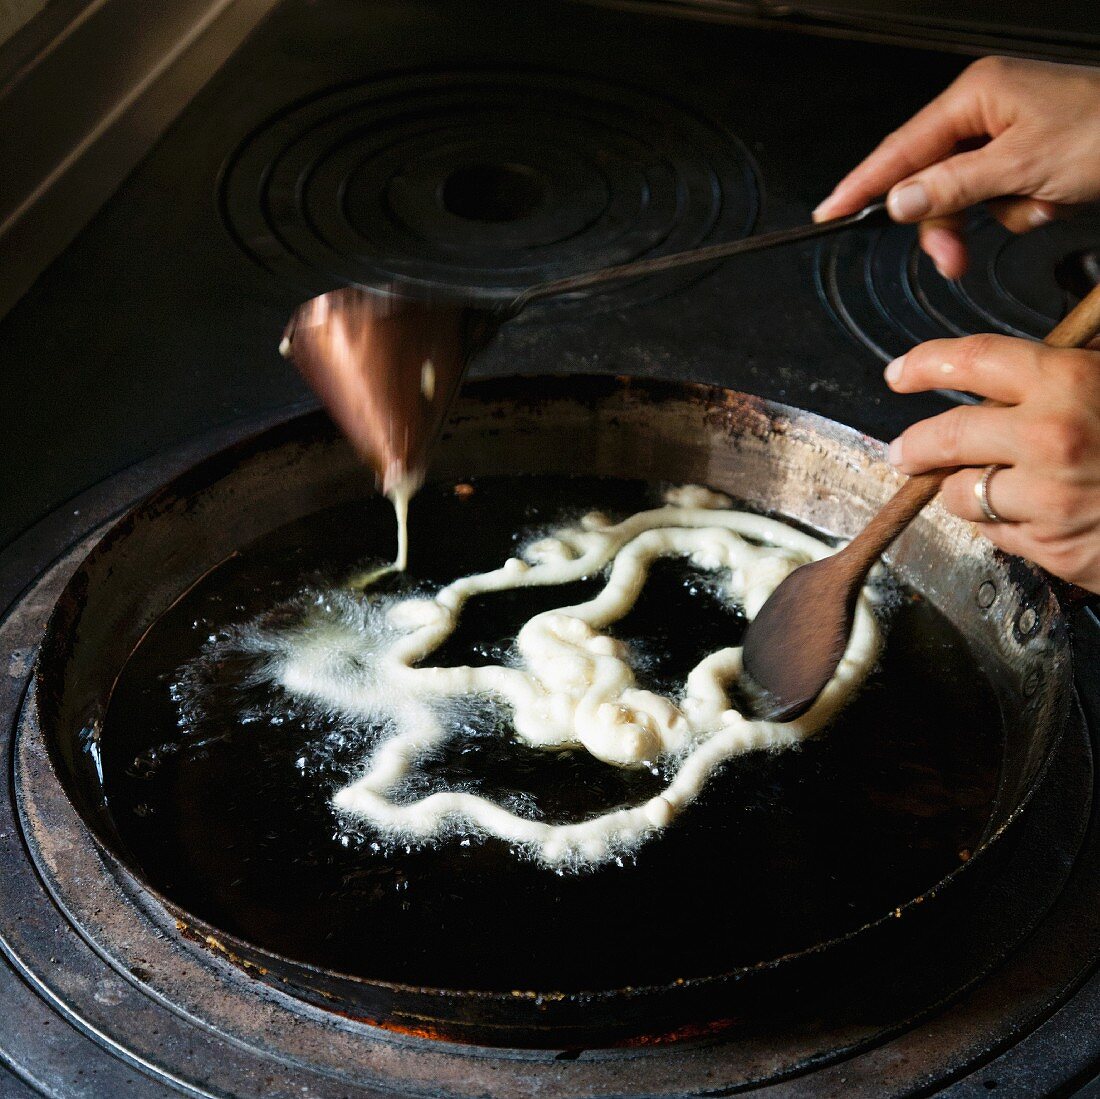 Raw batter being added to hot oil